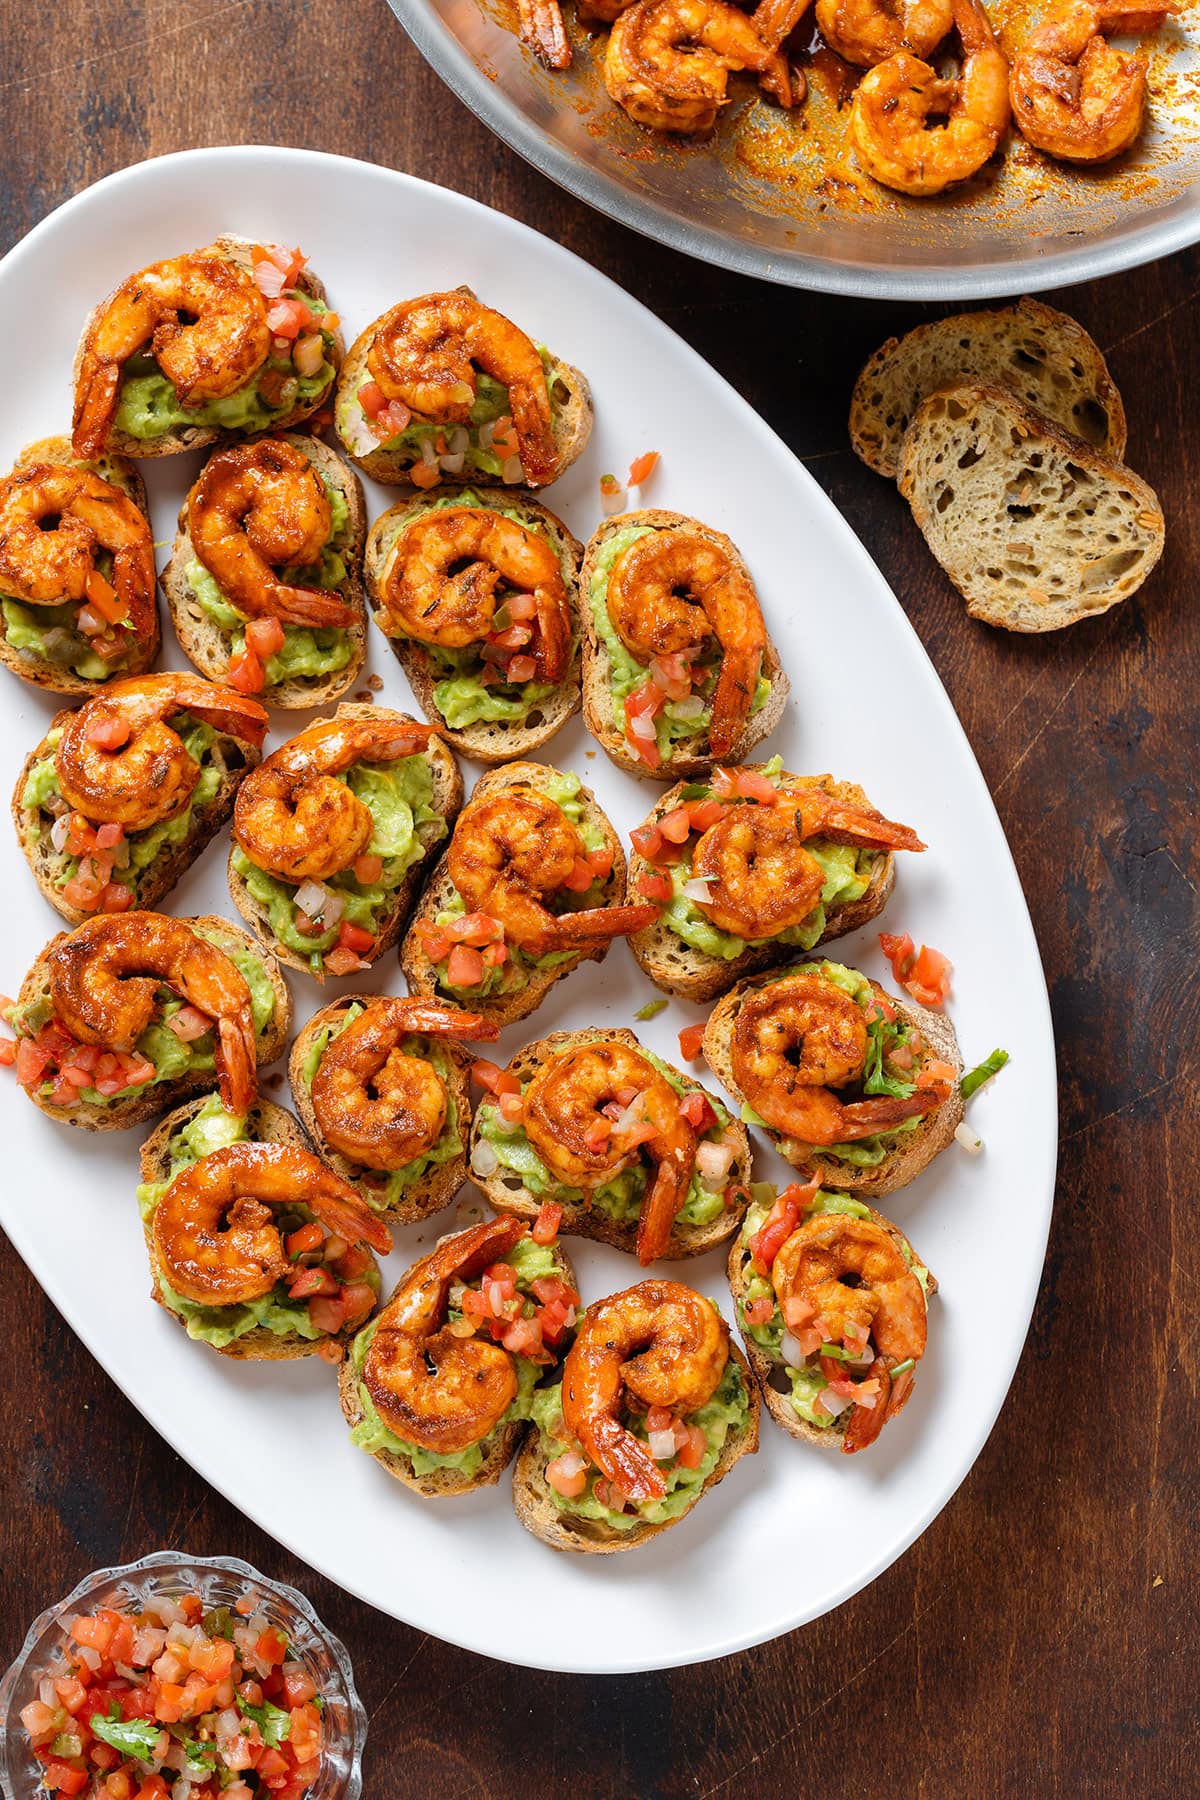 Toasted baguette slices topped with guacamole, fresh salsa, and cajun shrimp.